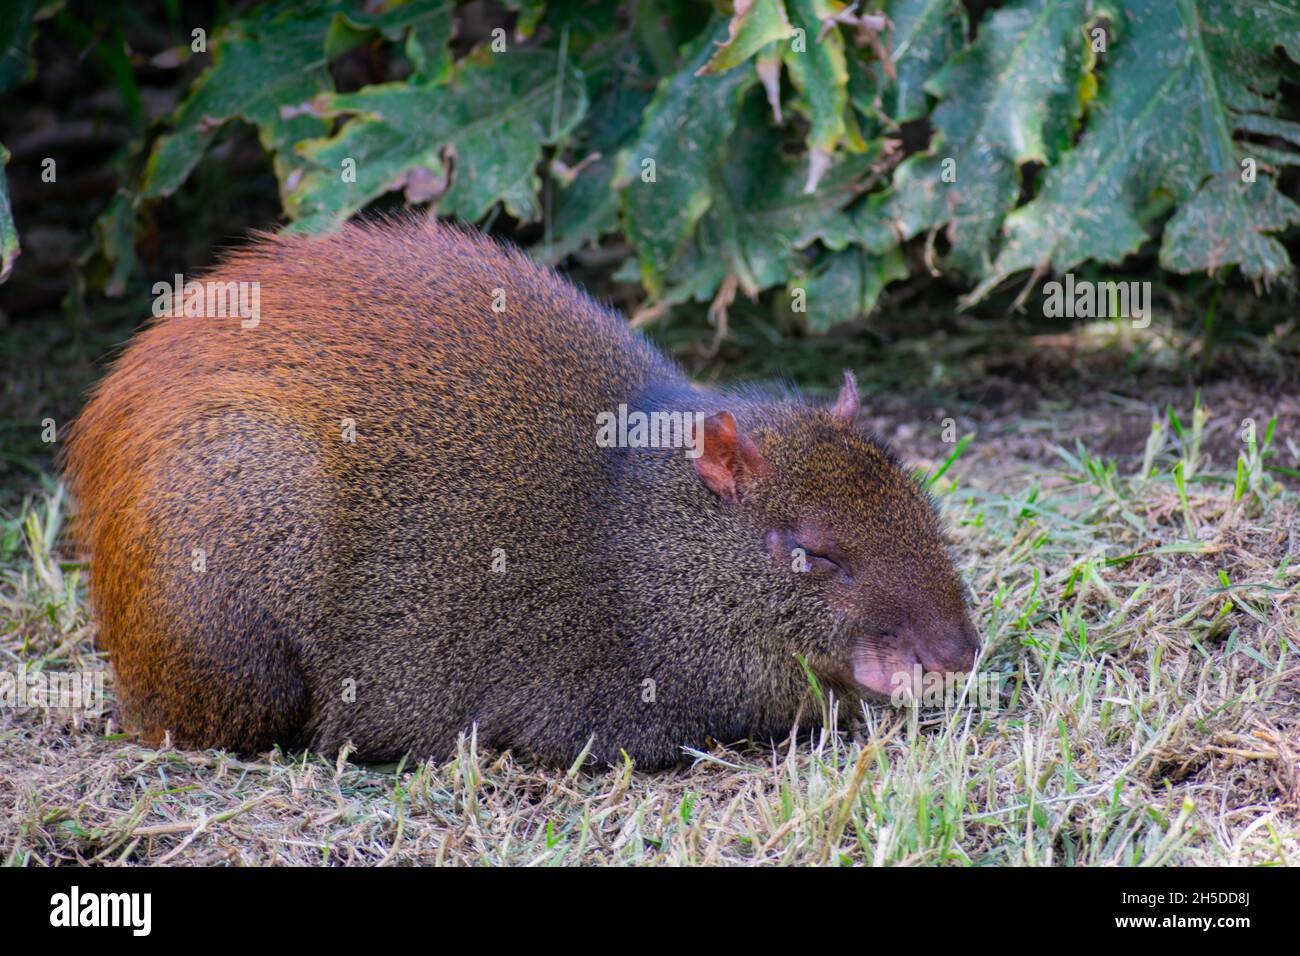 Closeup of the agouti, common agouti is any of several rodent species of the genus Dasyprocta. Stock Photo